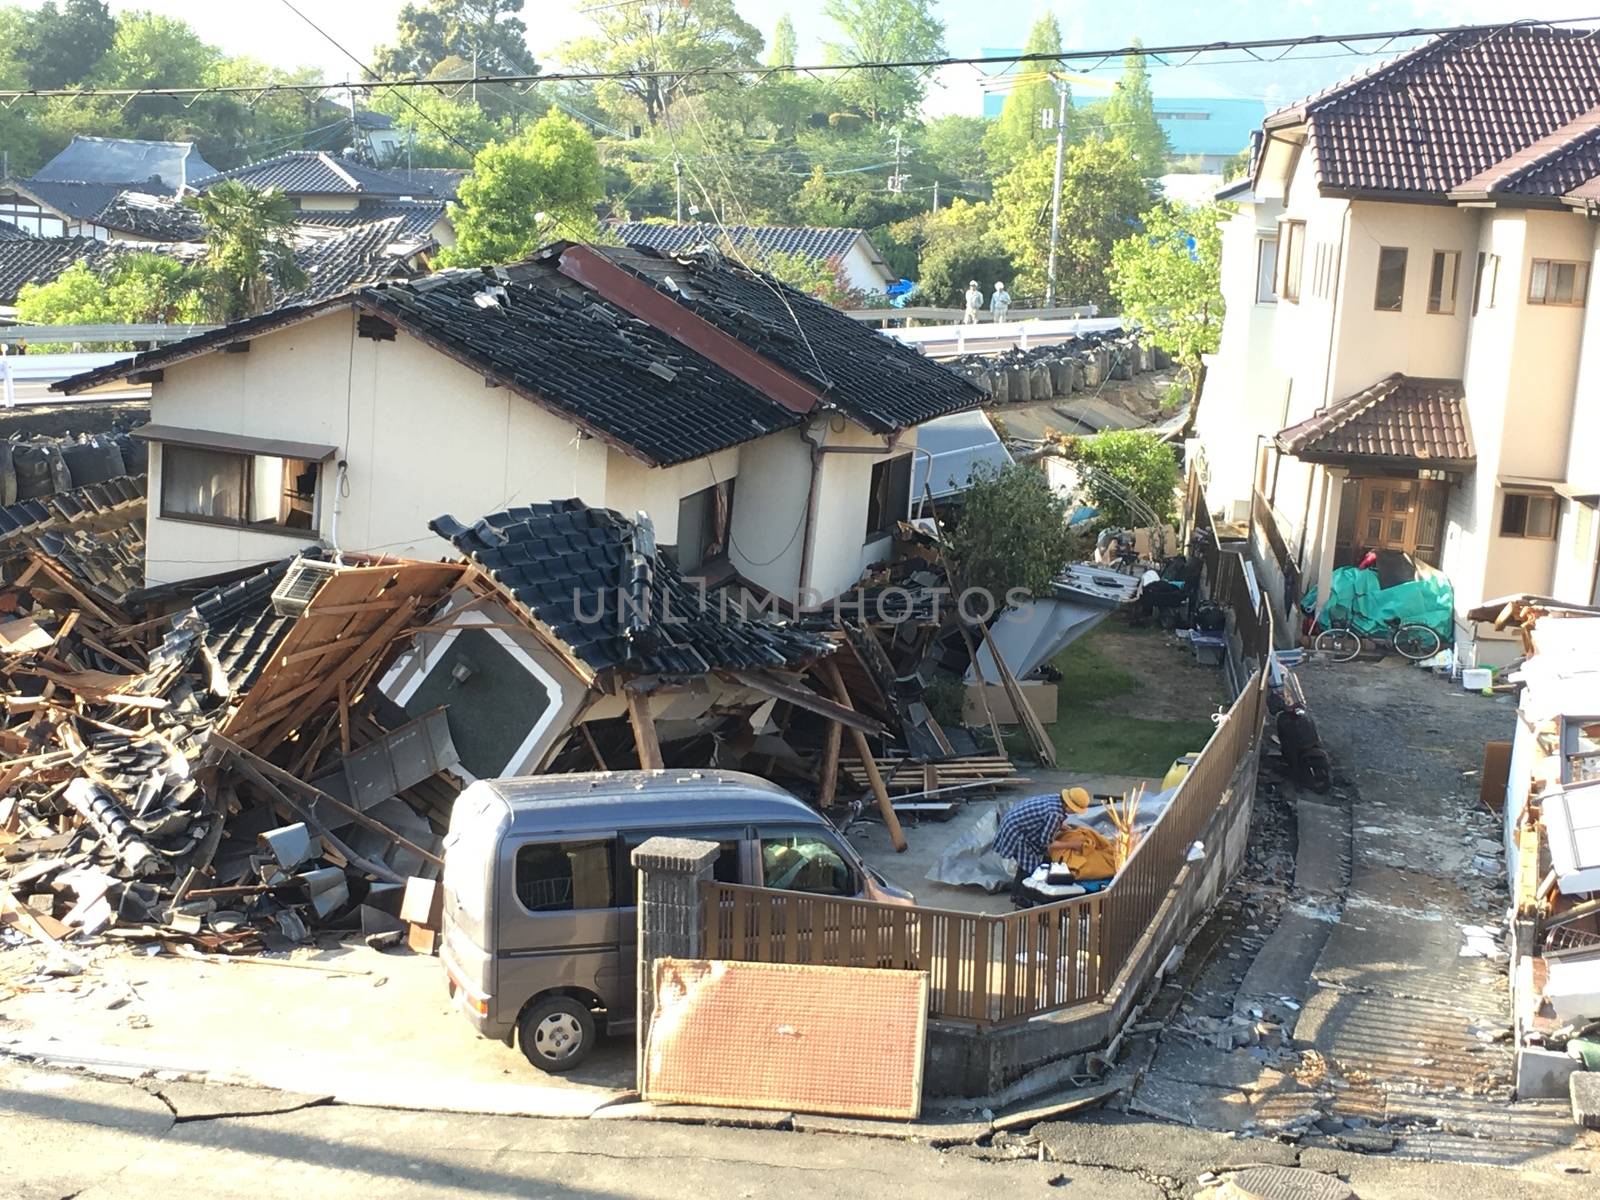 JAPAN, Mashiki: A collapsed house is pictured following an earthquake, on April 20, 2016 in Mashiki near Kumamoto, Japan. As of April 20, 48 people were confirmed dead after strong earthquakes rocked Kyushu Island of Japan. Nearly 11,000 people are reportedly evacuated after the tremors Thursday night at magnitude 6.5 and early Saturday morning at 7.3.